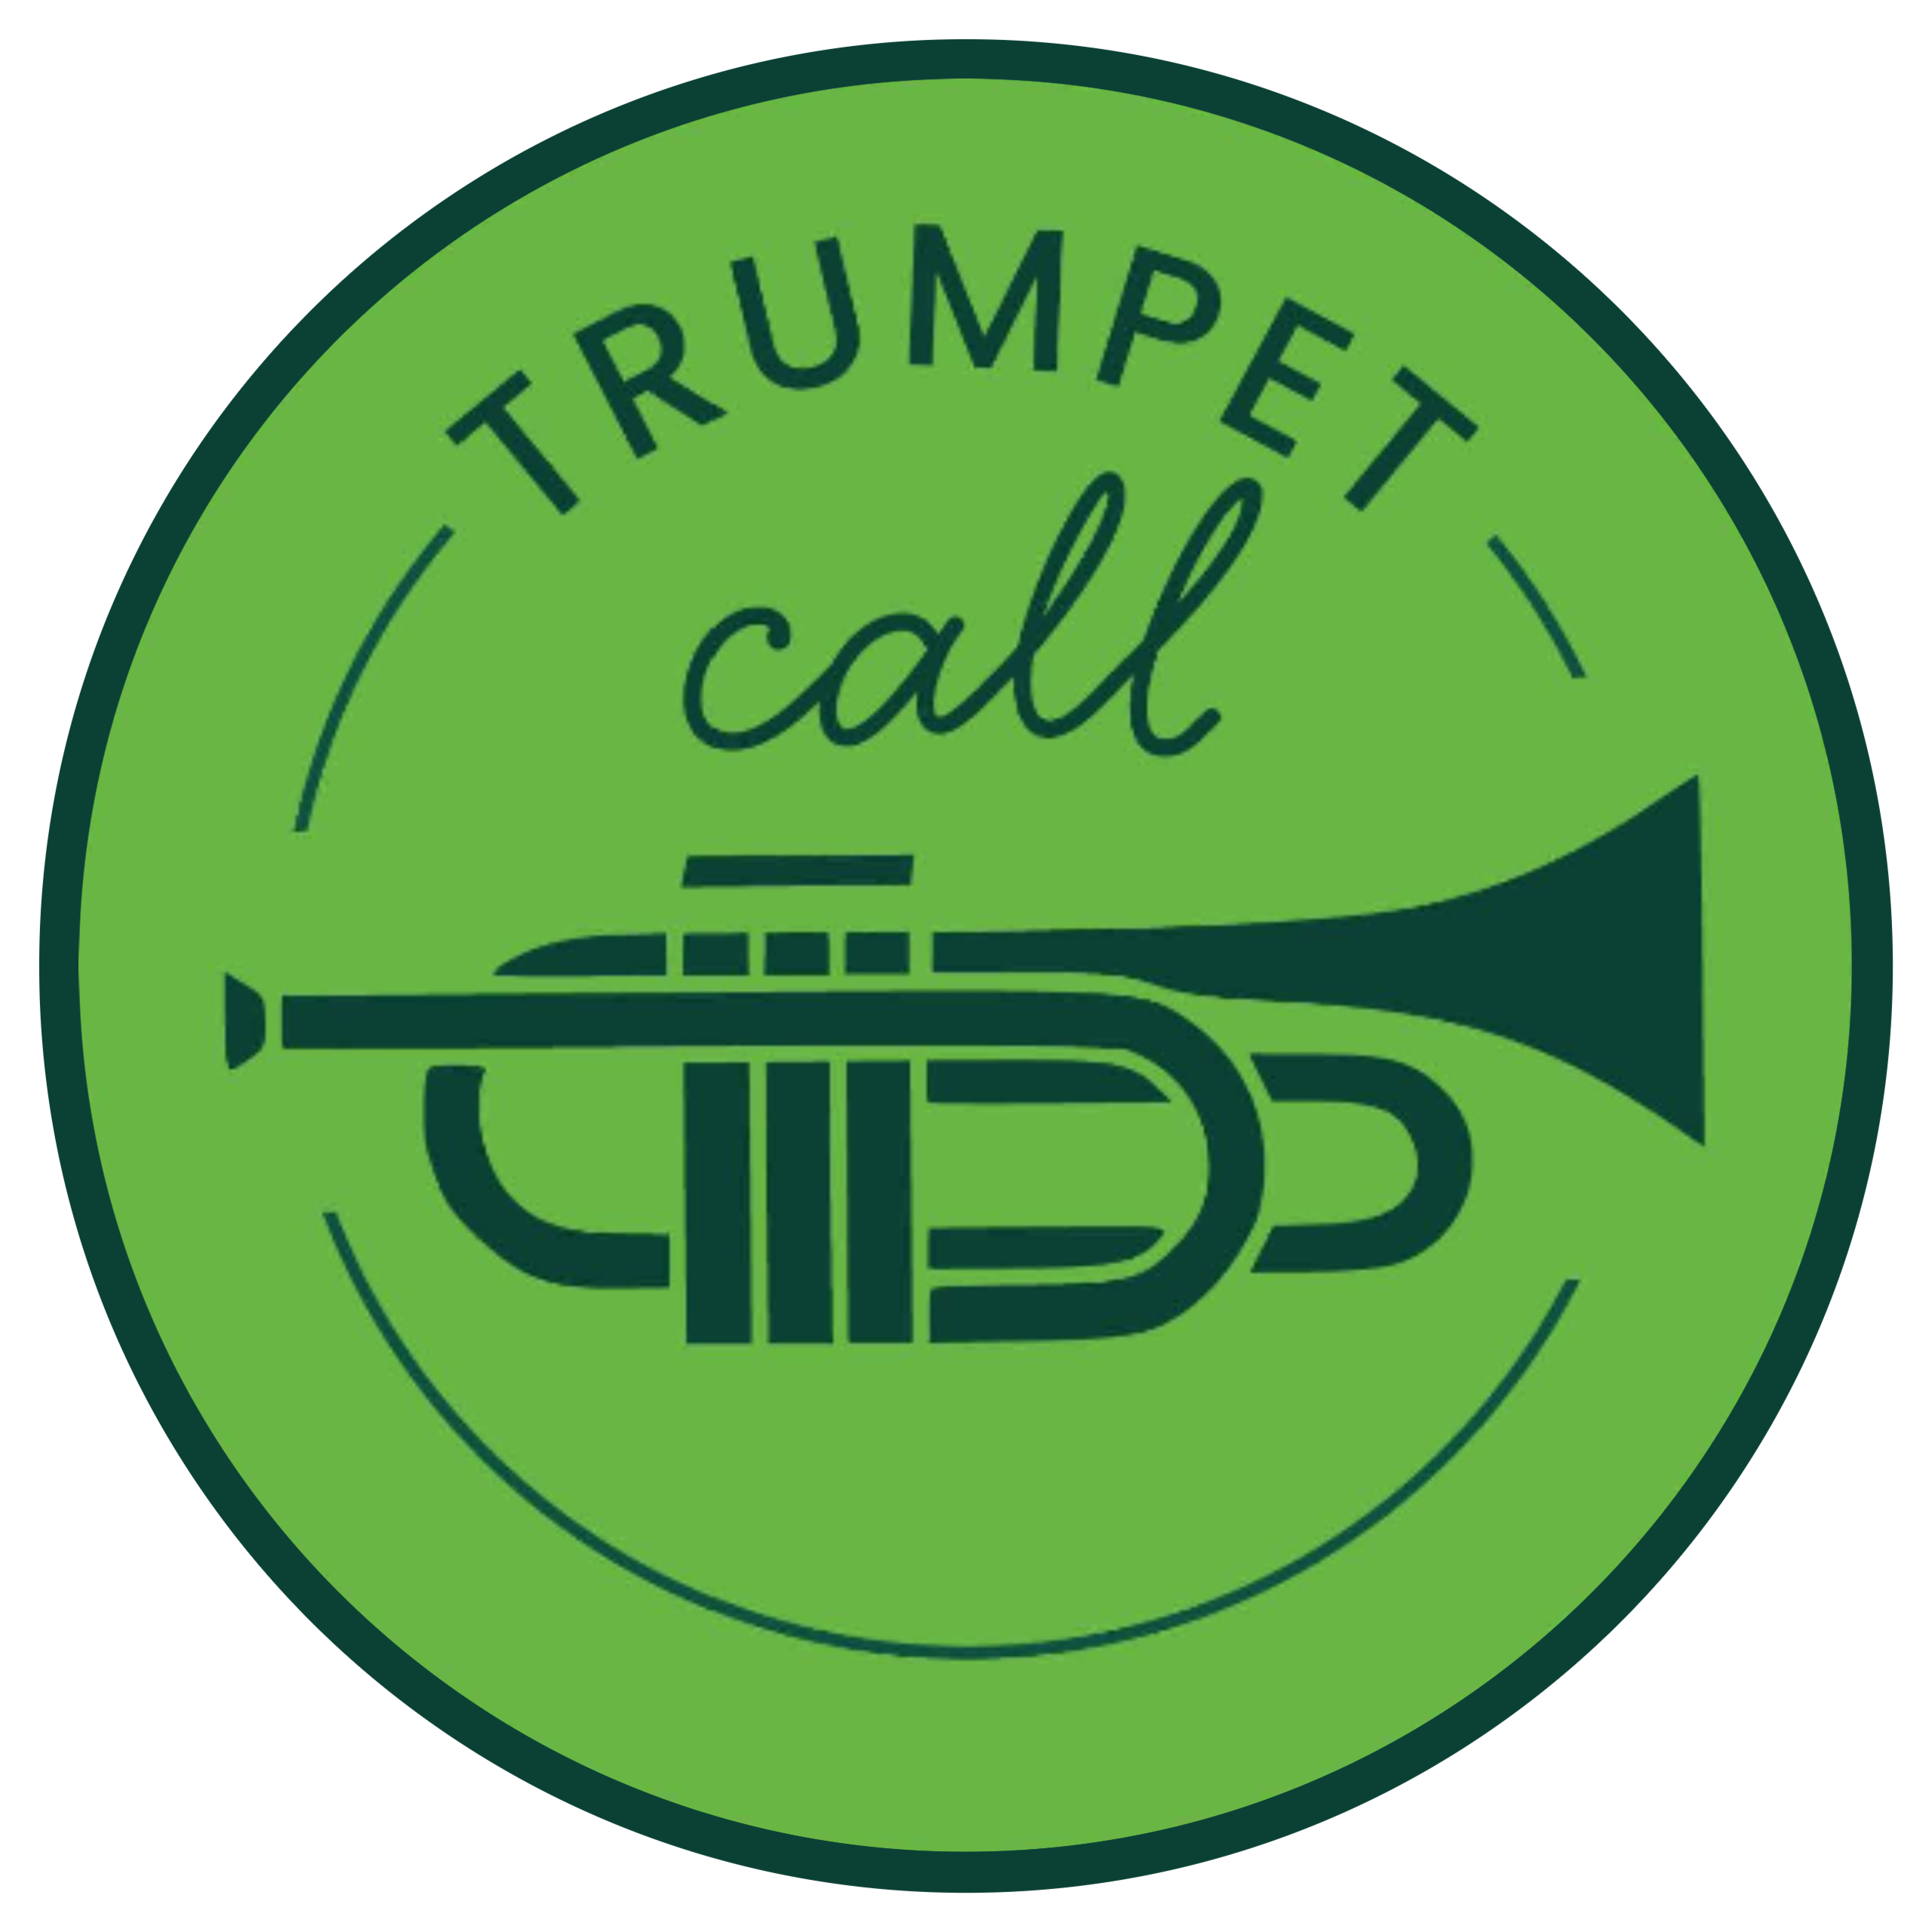 Link to Trumpet Call social media campaign